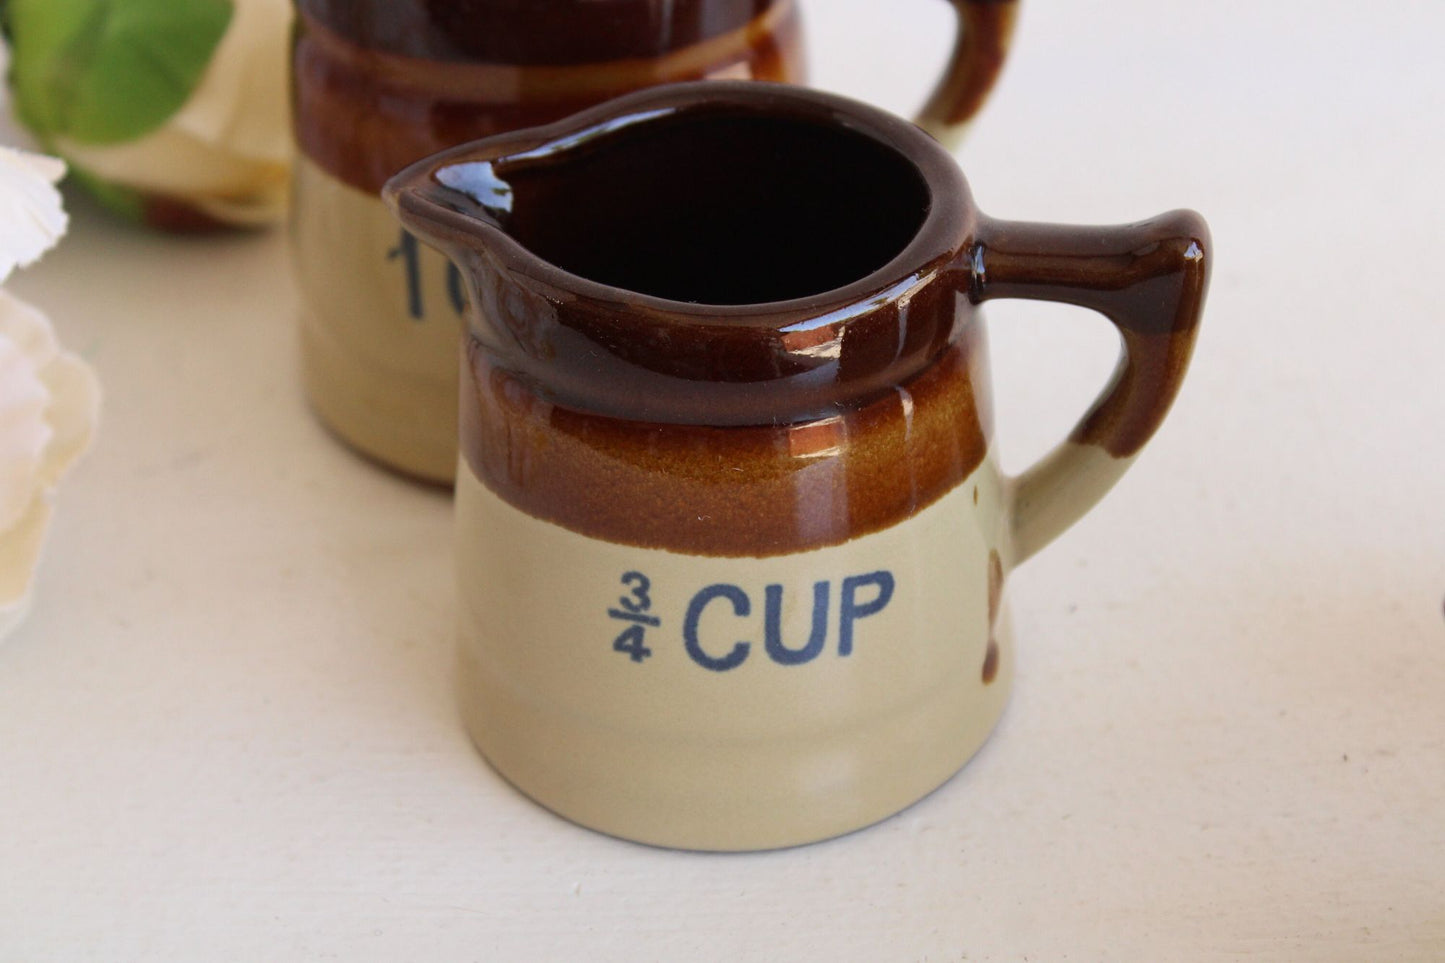 Vintage 1970s Measuring Cup Set, Ceramic Four Piece 1/4 C up to 1 C, Country Retro Kitchen